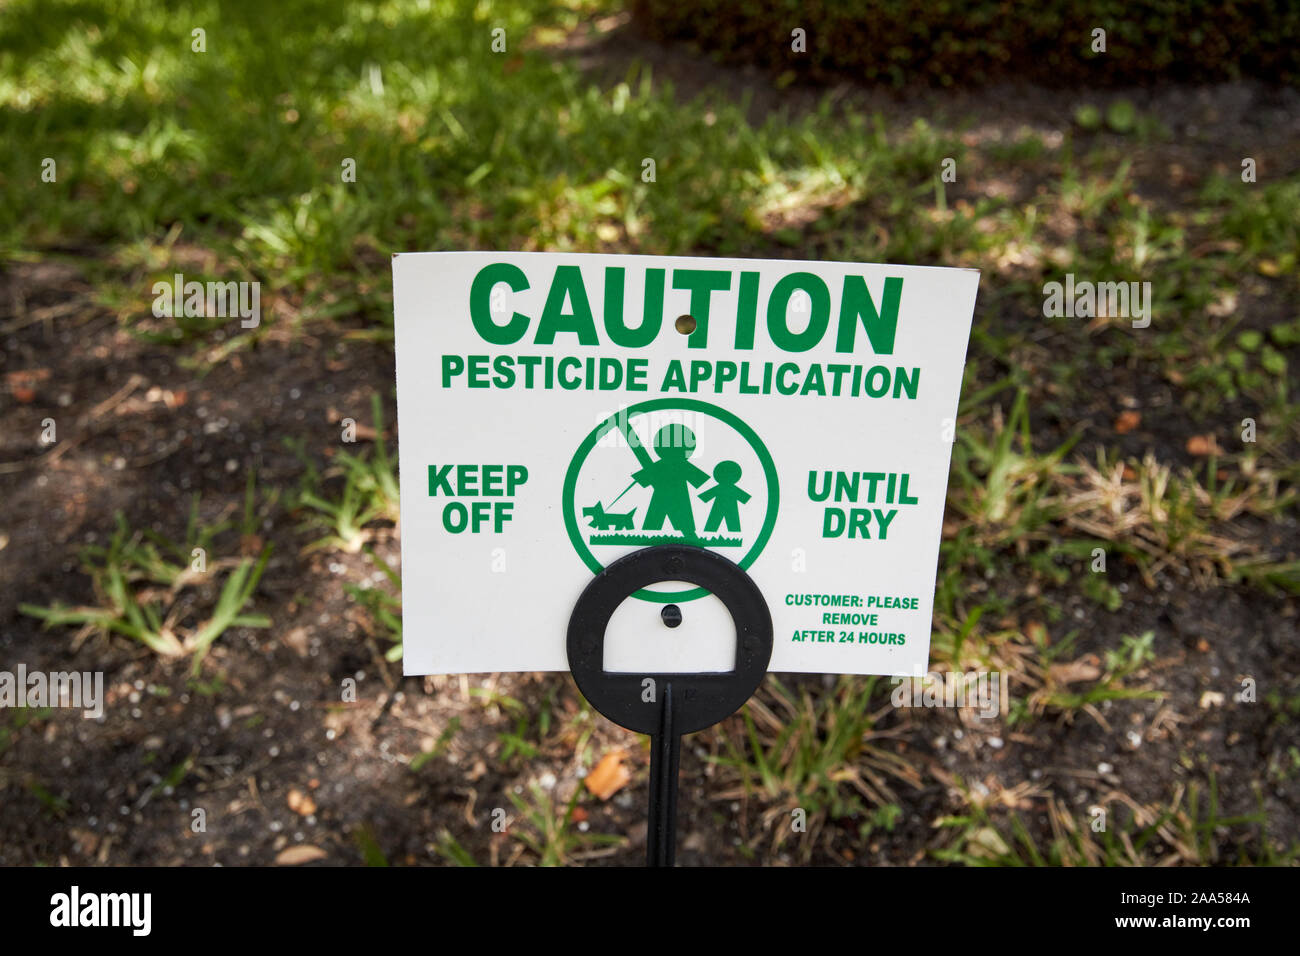 caution warning sign for pesticide application to garden in florida usa Stock Photo